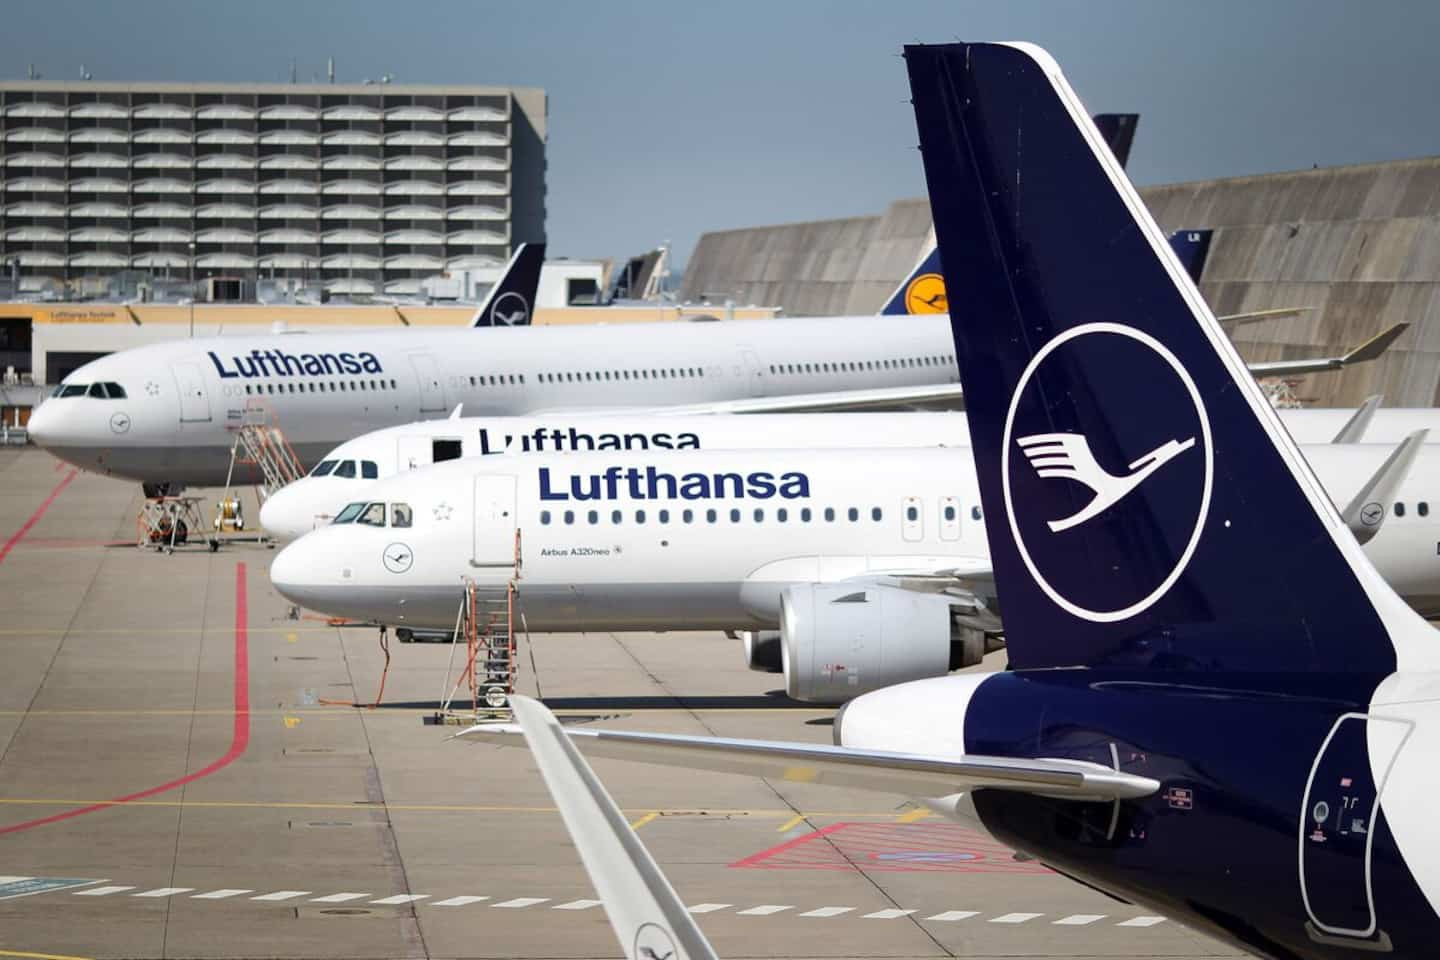 Faced with a strike, Lufthansa cancels almost all of its flights in Germany